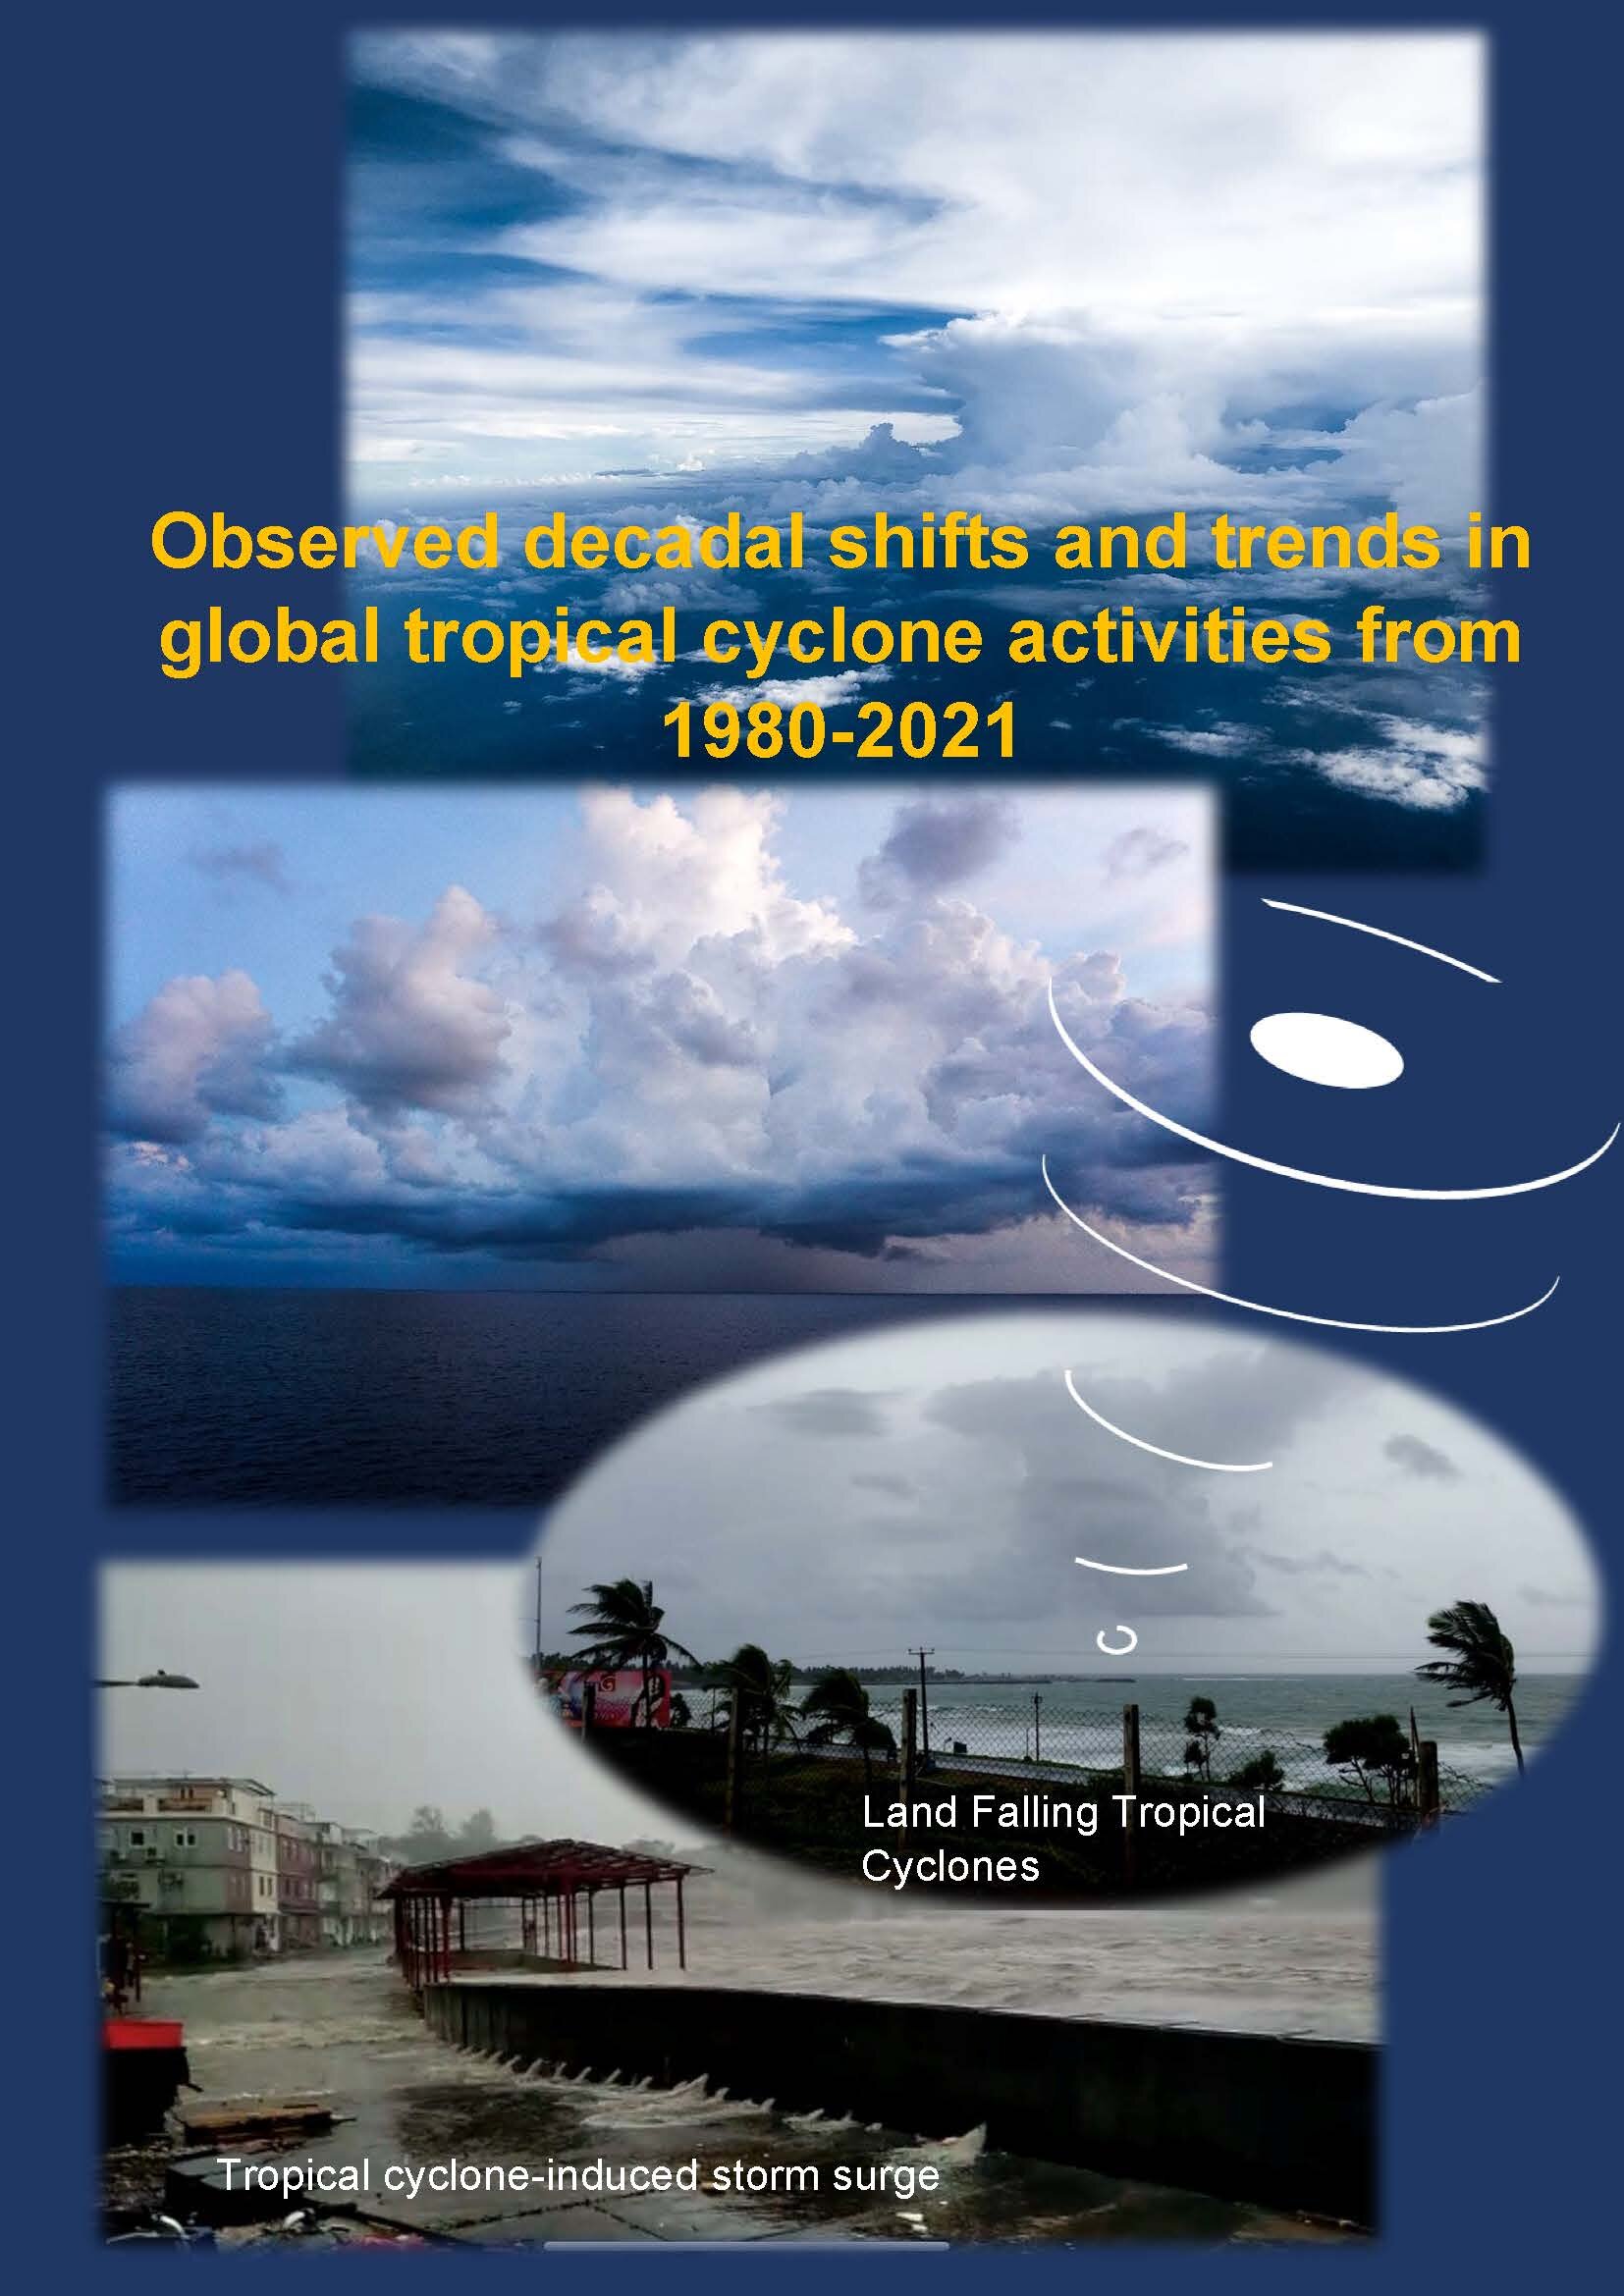 Improving the Prediction and Management of Tropical Cyclones by Understanding their Patterns